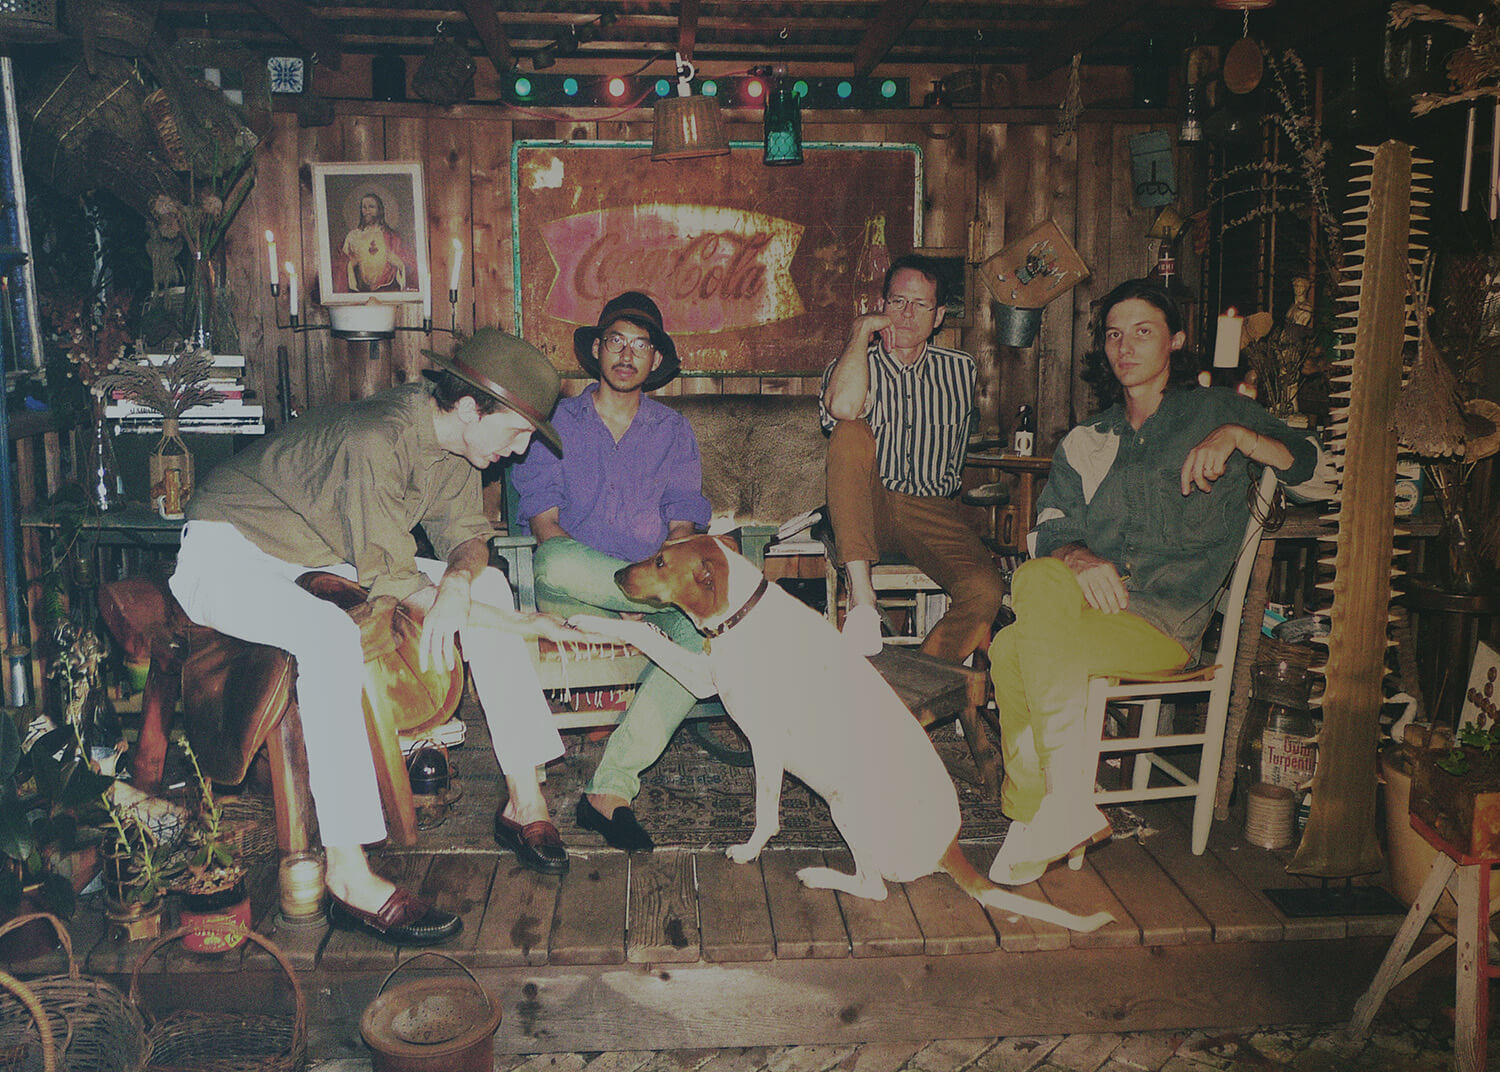 Deerhunter's Fading Frontier is out now. (Courtesy of the artist)